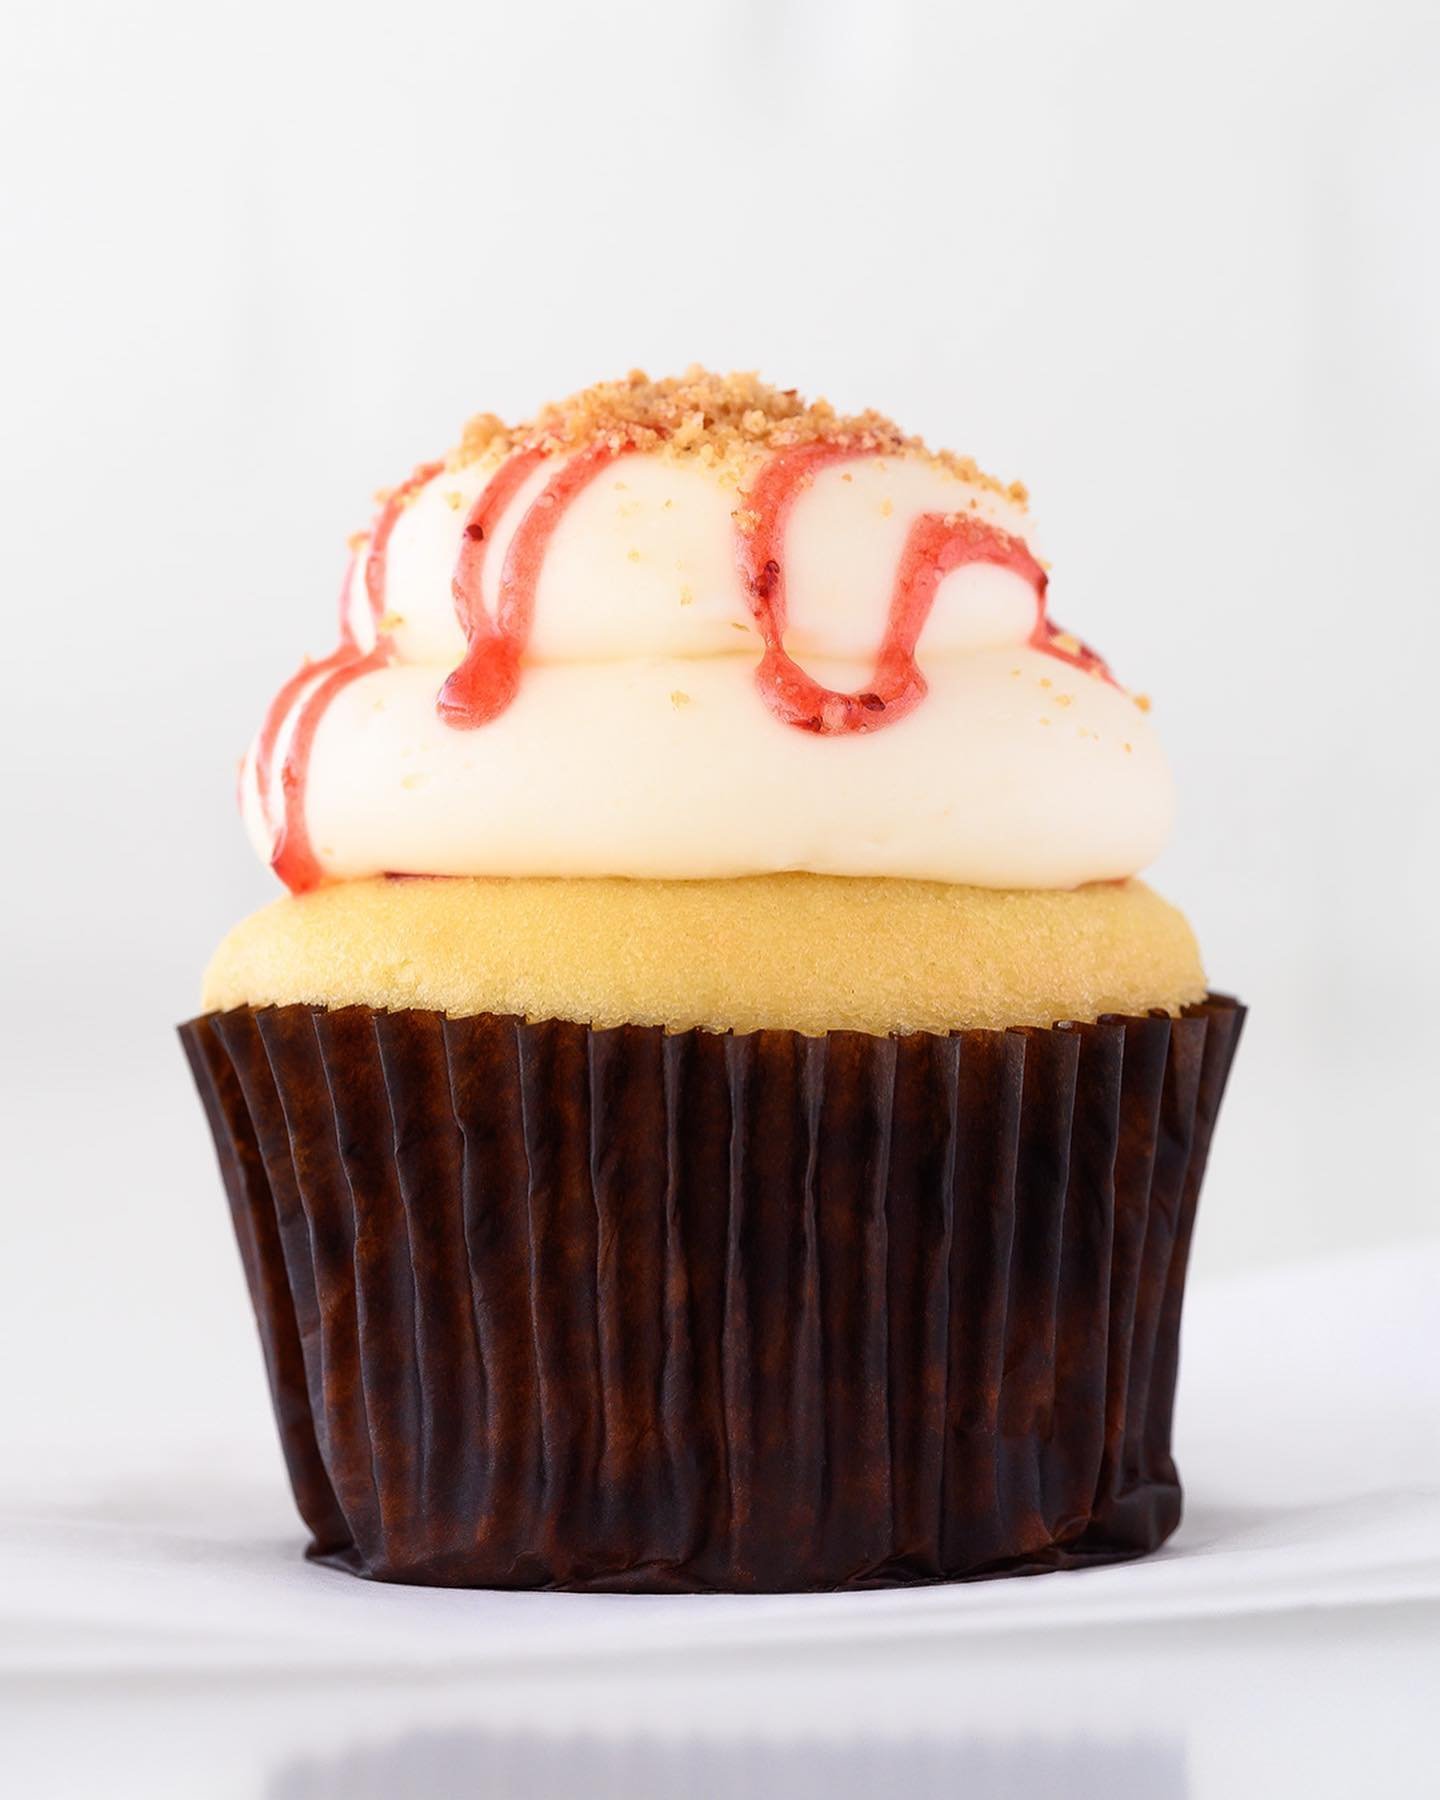 🧁 MAY CUPCAKE OF THE MONTH 🧁

🍓🍰 Strawberry Cheesecake is back 🍓🍰

Vanilla cupcake
Strawberry preserves filling
Cream cheese icing
Strawberry preserves drizzle
Graham cracker crumble

Here and @suarezbakeryandbarra till sold out every day this 